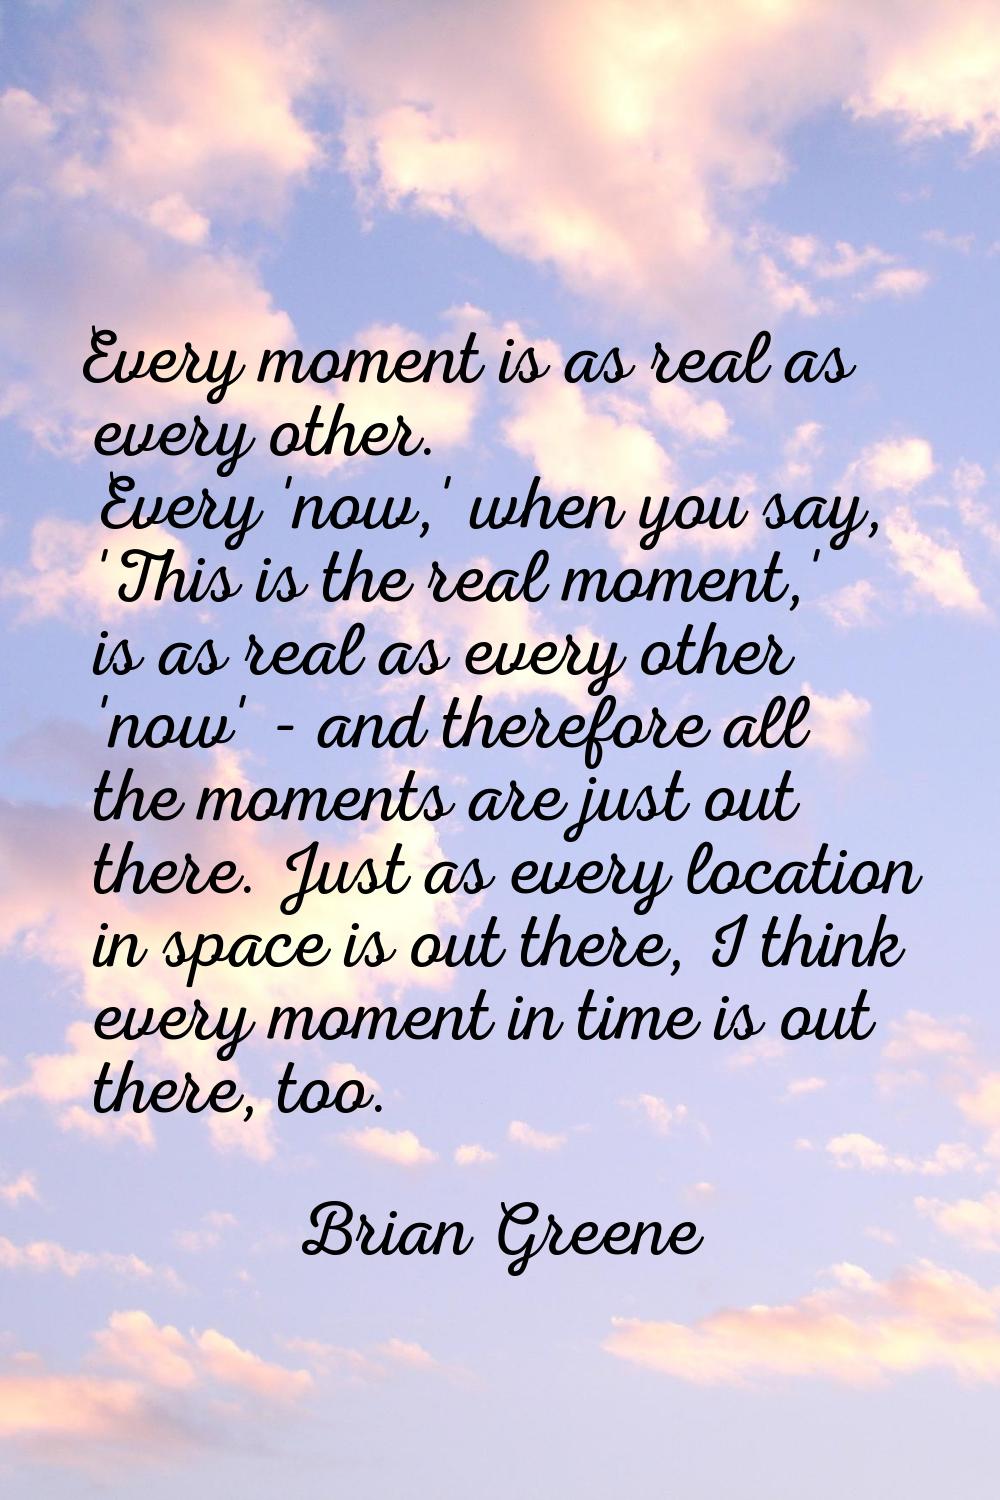 Every moment is as real as every other. Every 'now,' when you say, 'This is the real moment,' is as